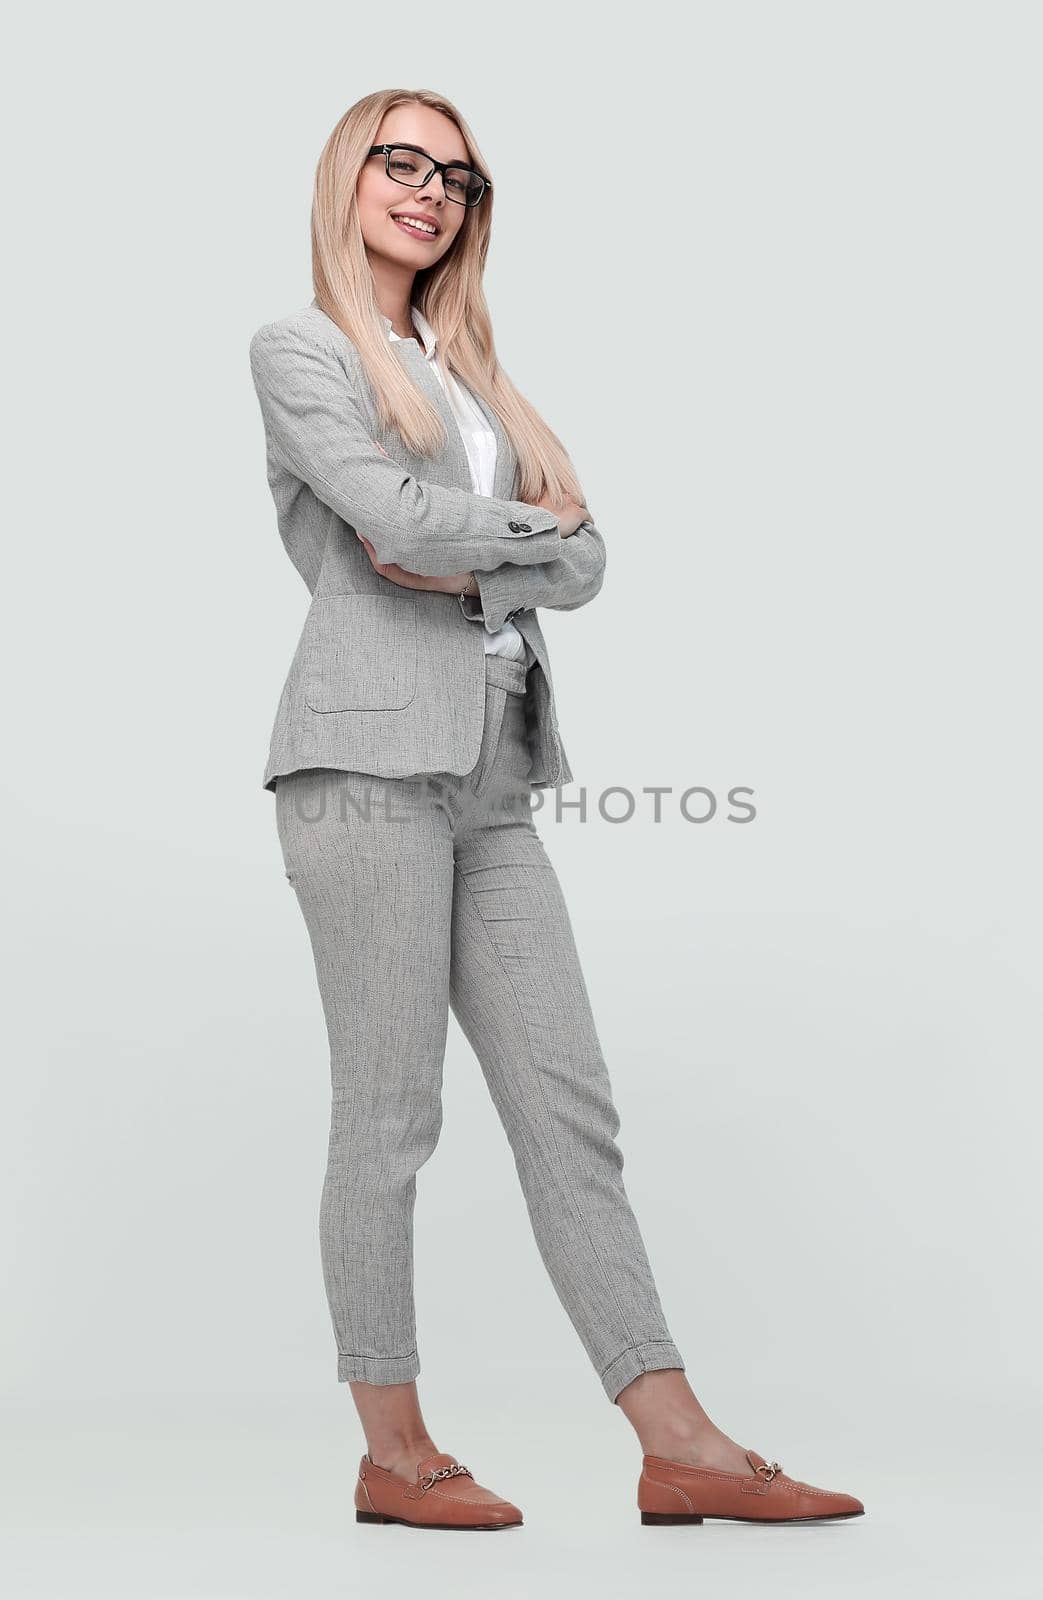 in full growth. portrait of a successful confident businesswoman .isolated on white background